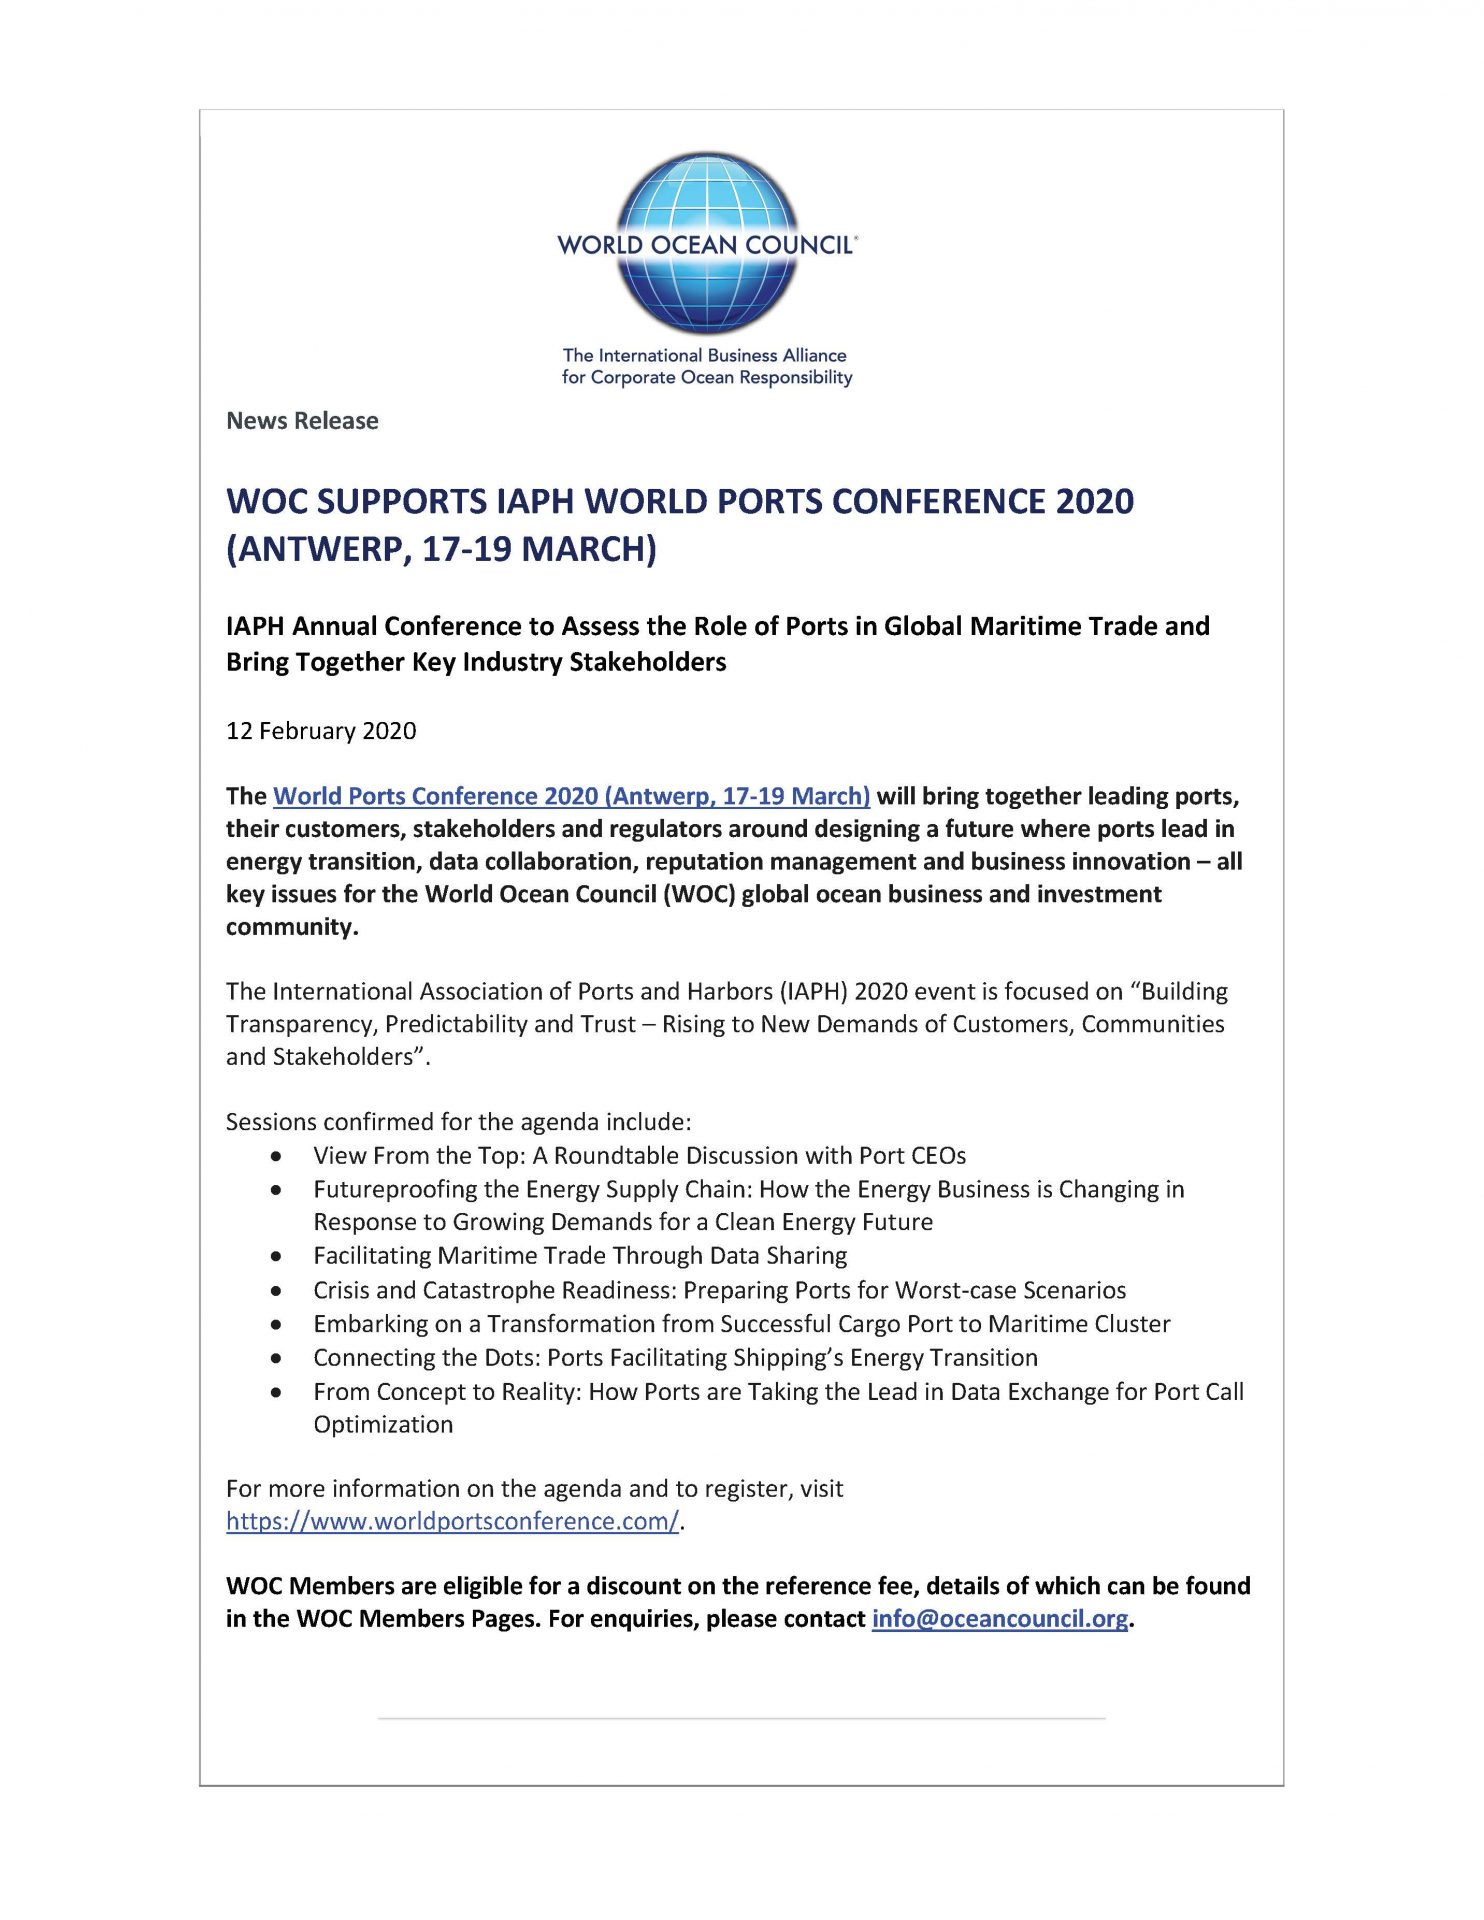 WOC Supports IAPH World Ports Conference 2020 (Antwerp 17-19 March) - 12 March 2020